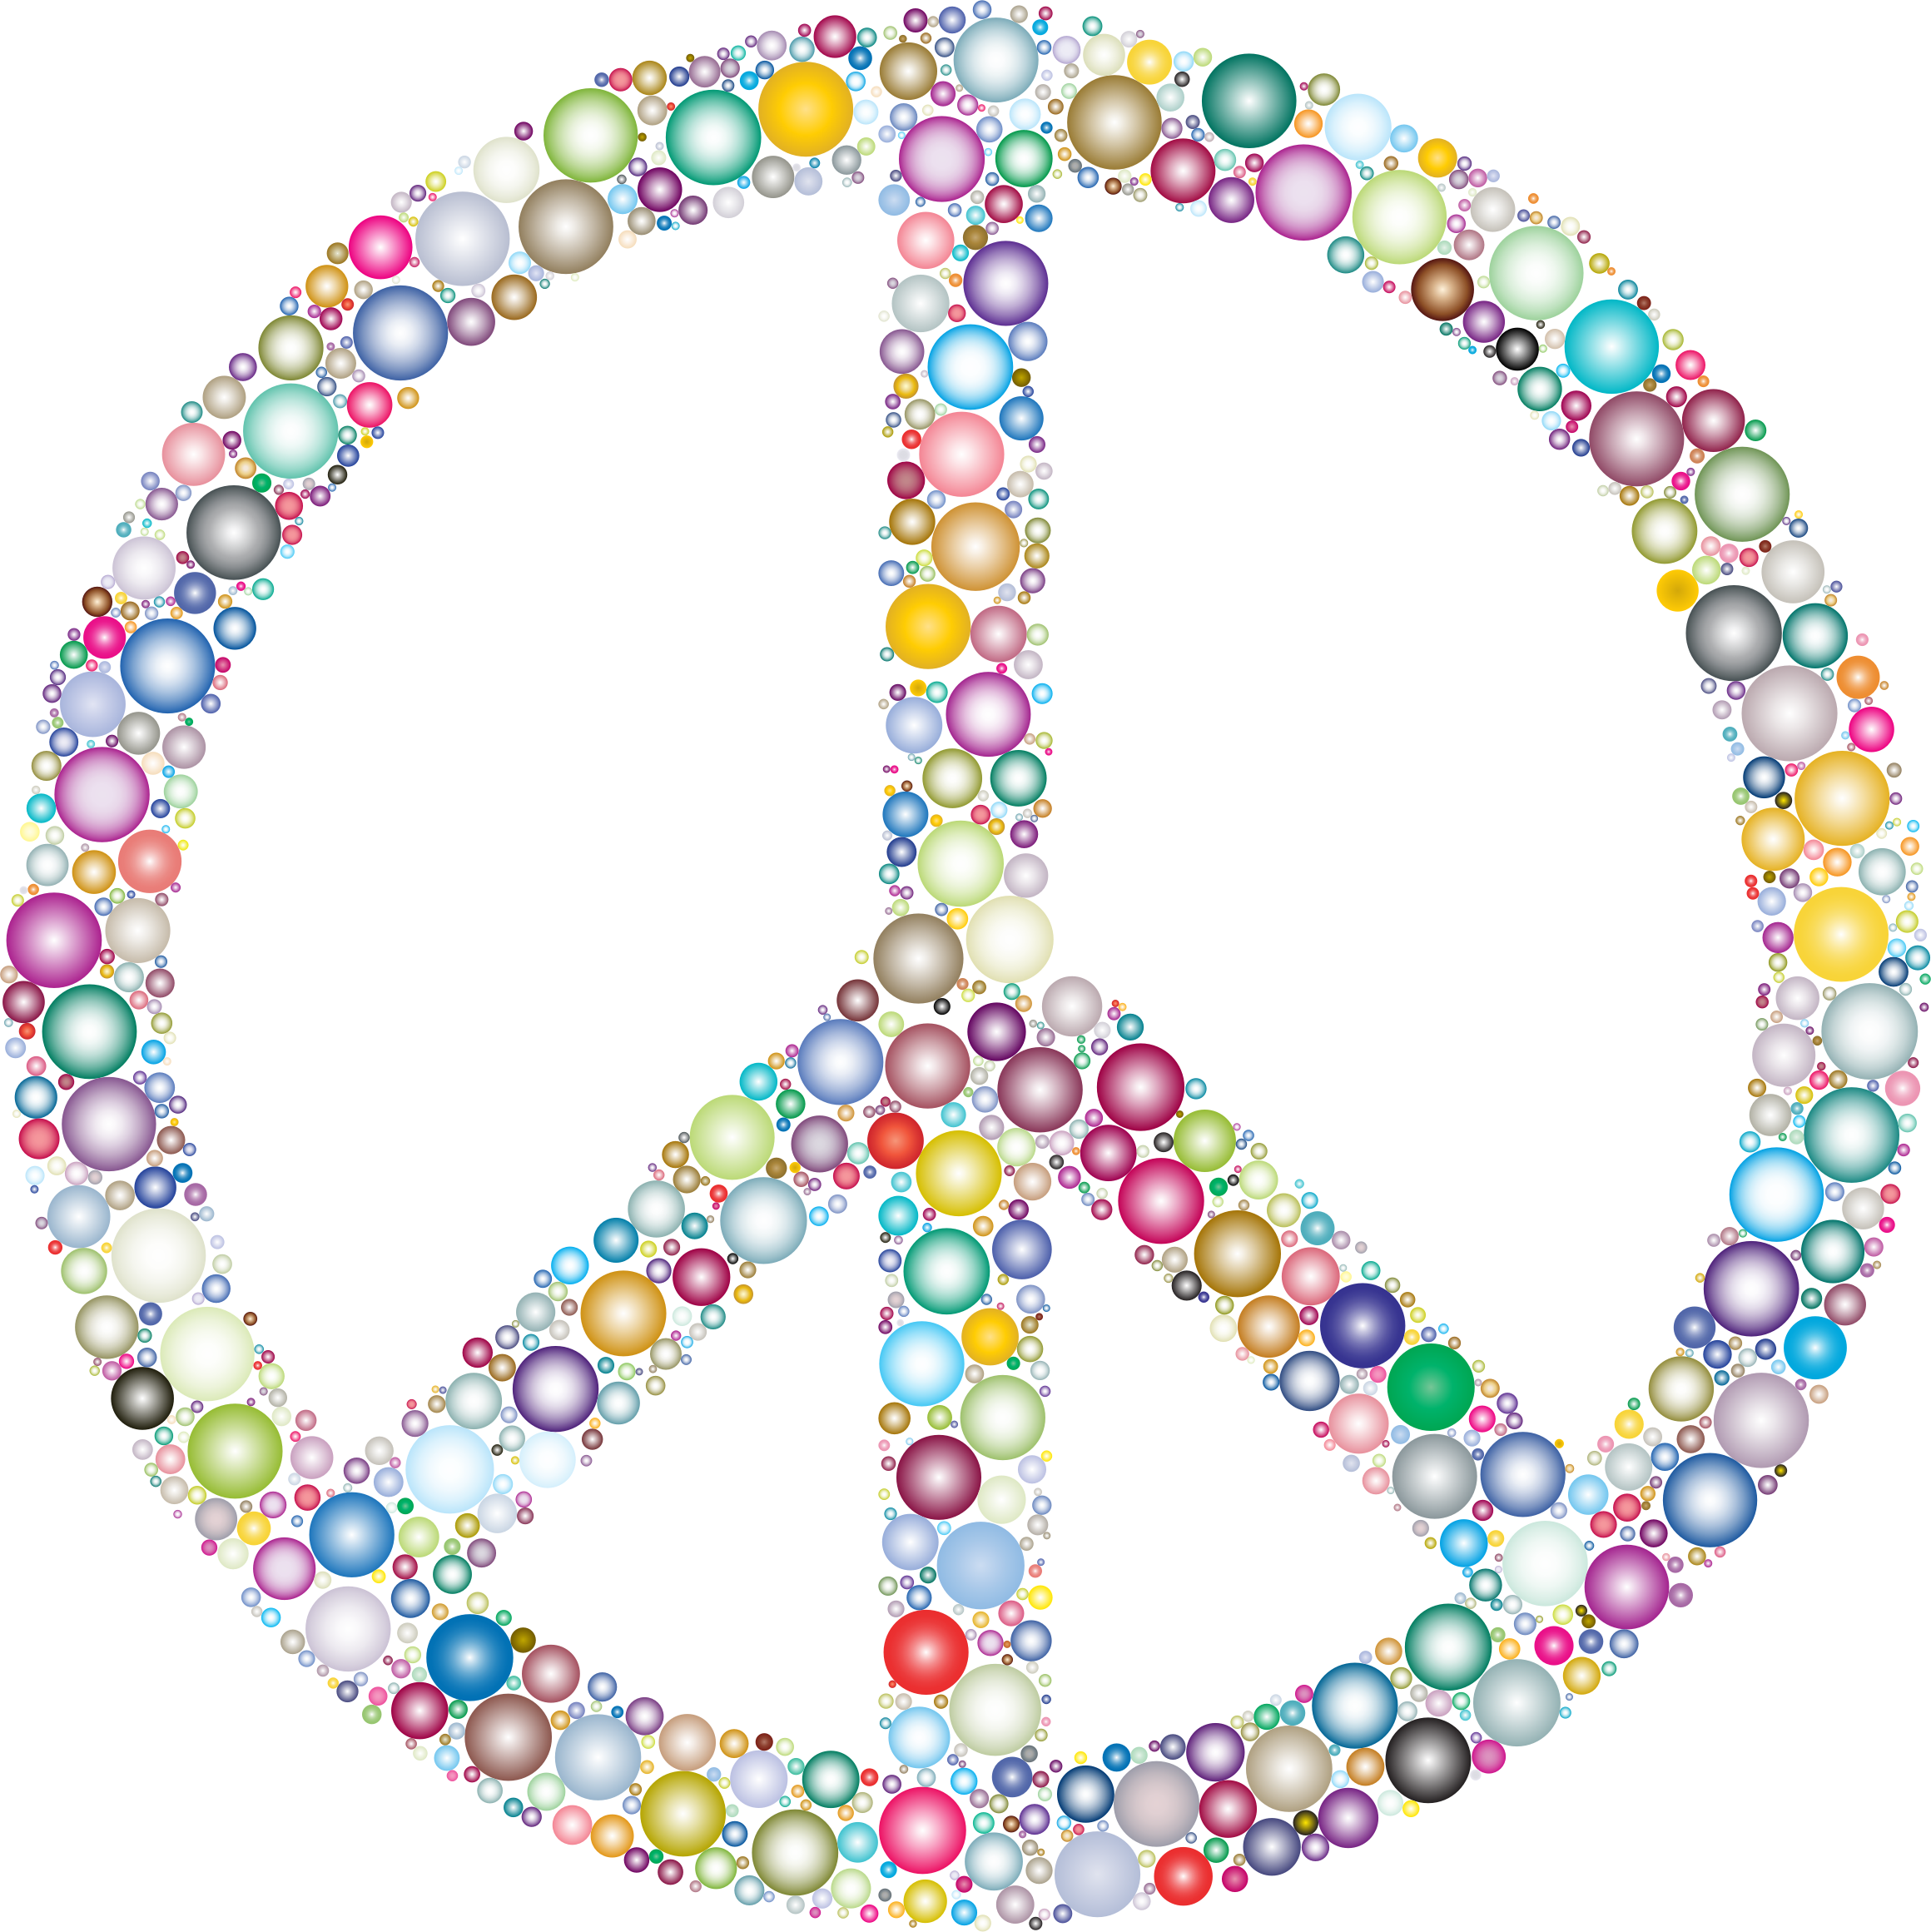 Colorful Circles Peace Sign 4 By Gdj